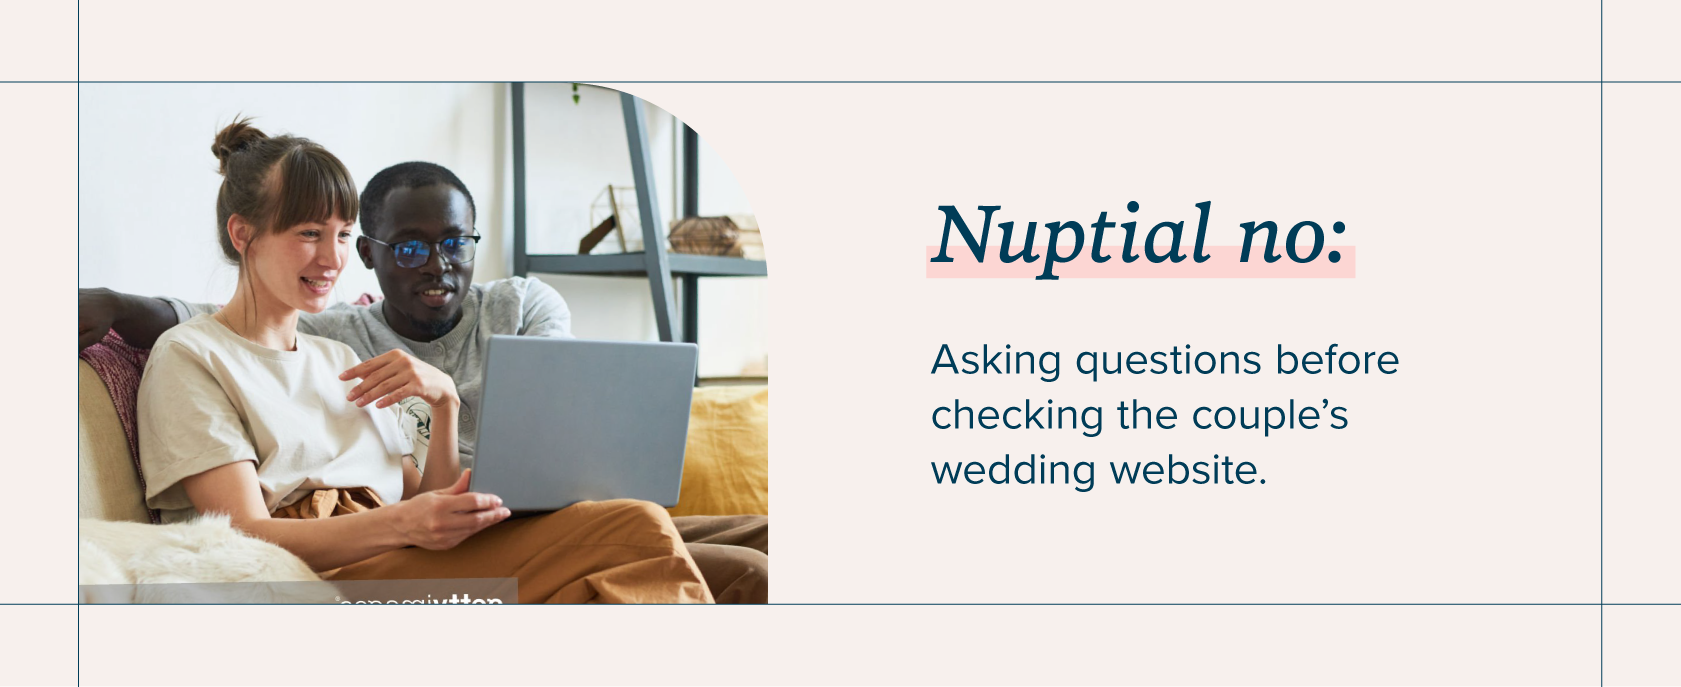 Asking-questions-before-checking-wedding-site (1)